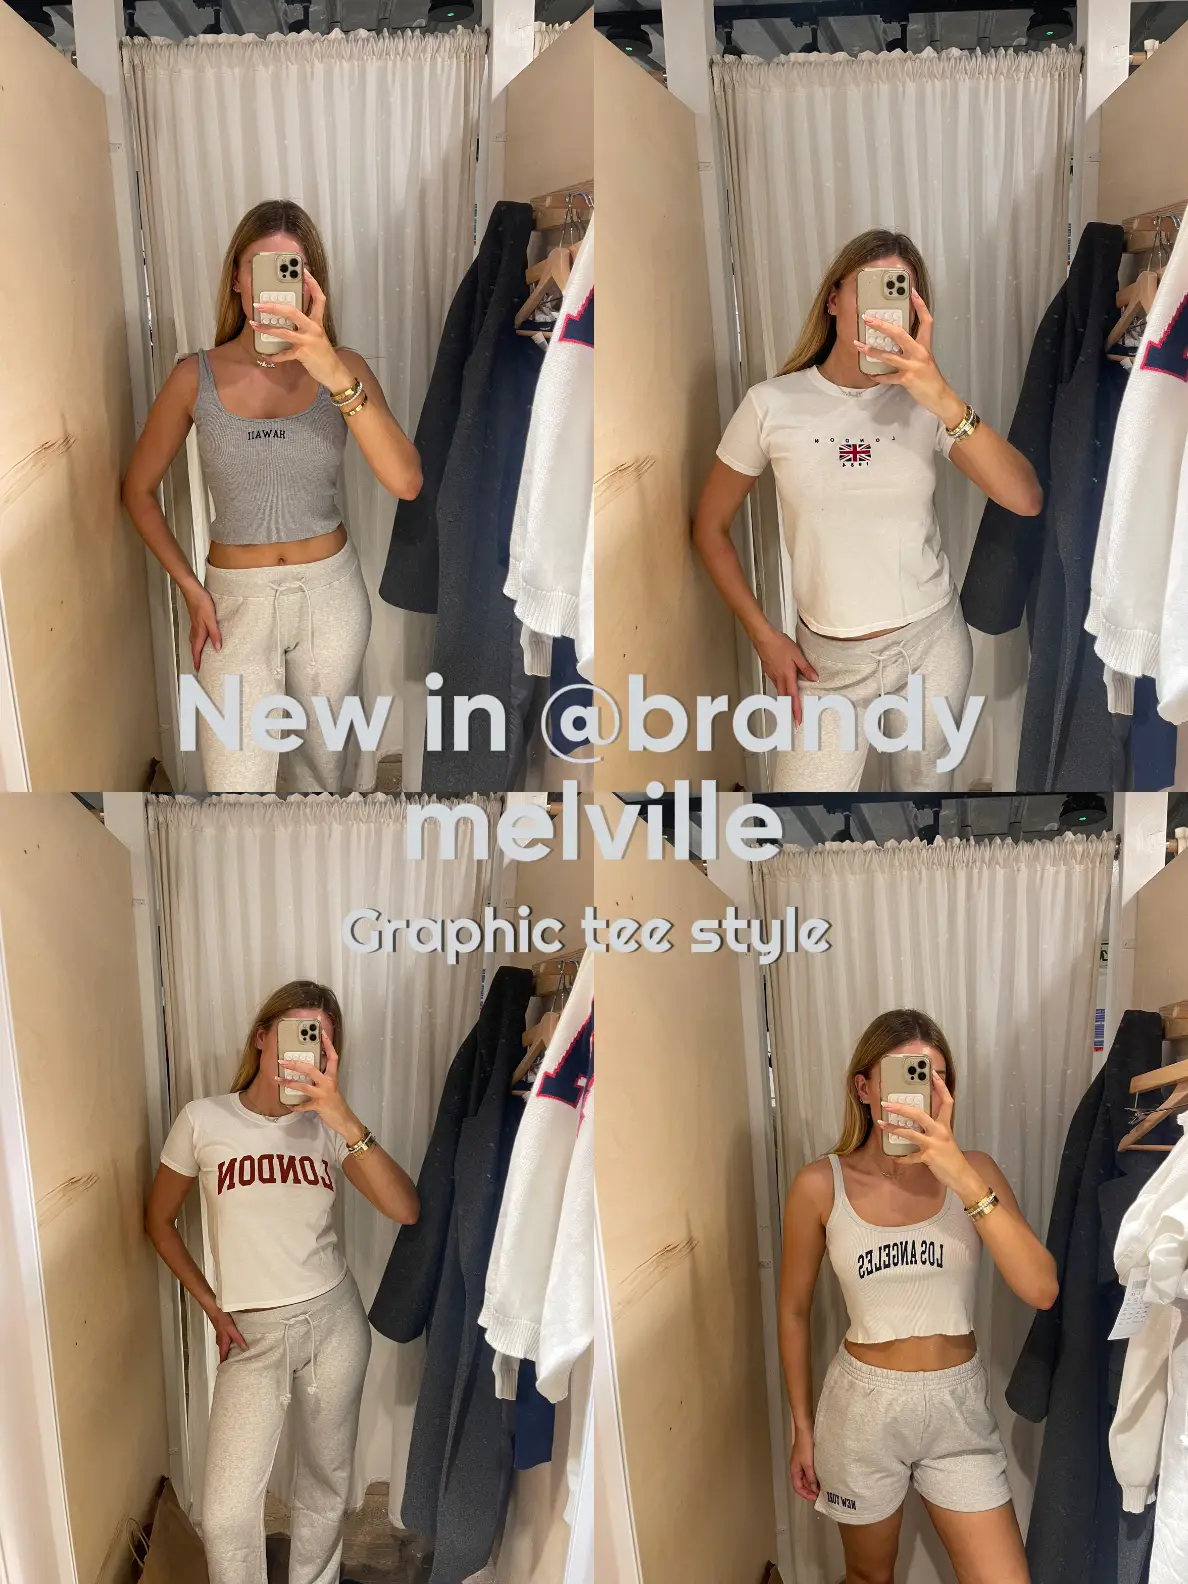 Brandy Melville beyonca tank Gray - $12 (60% Off Retail) - From mady